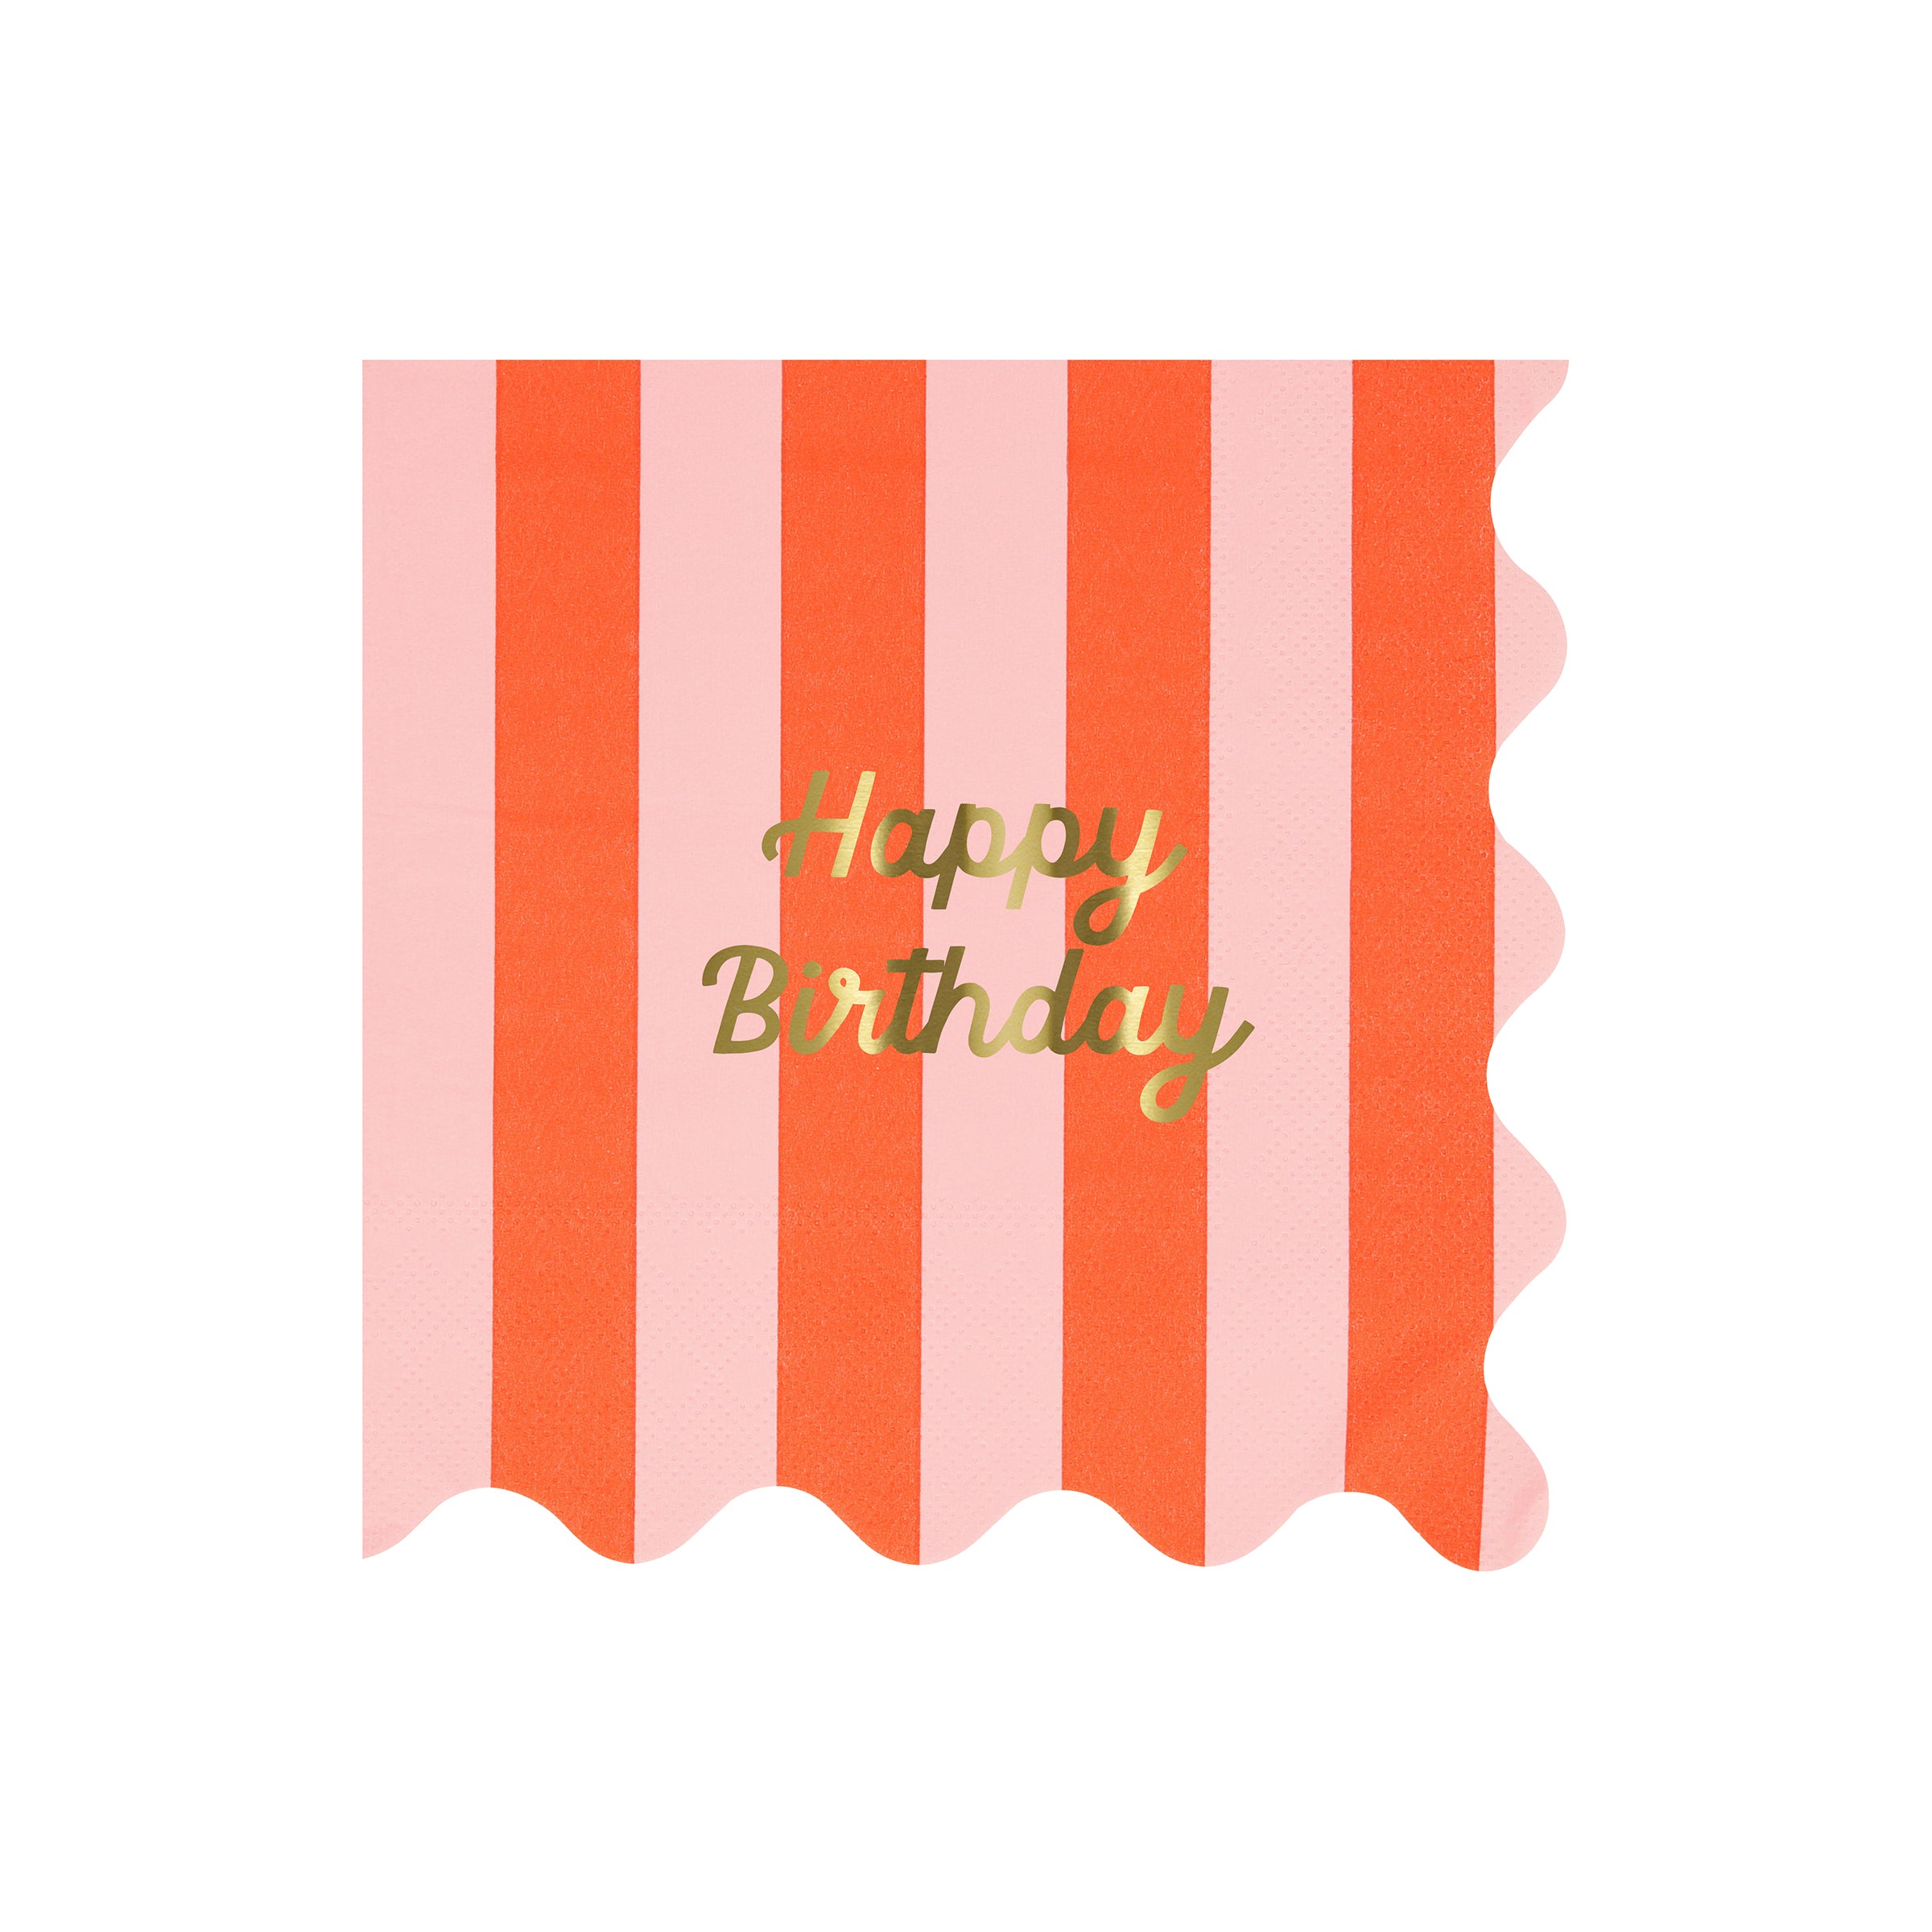 Our large striped party napkins have the words Happy Birthday on them in shiny gold foil.